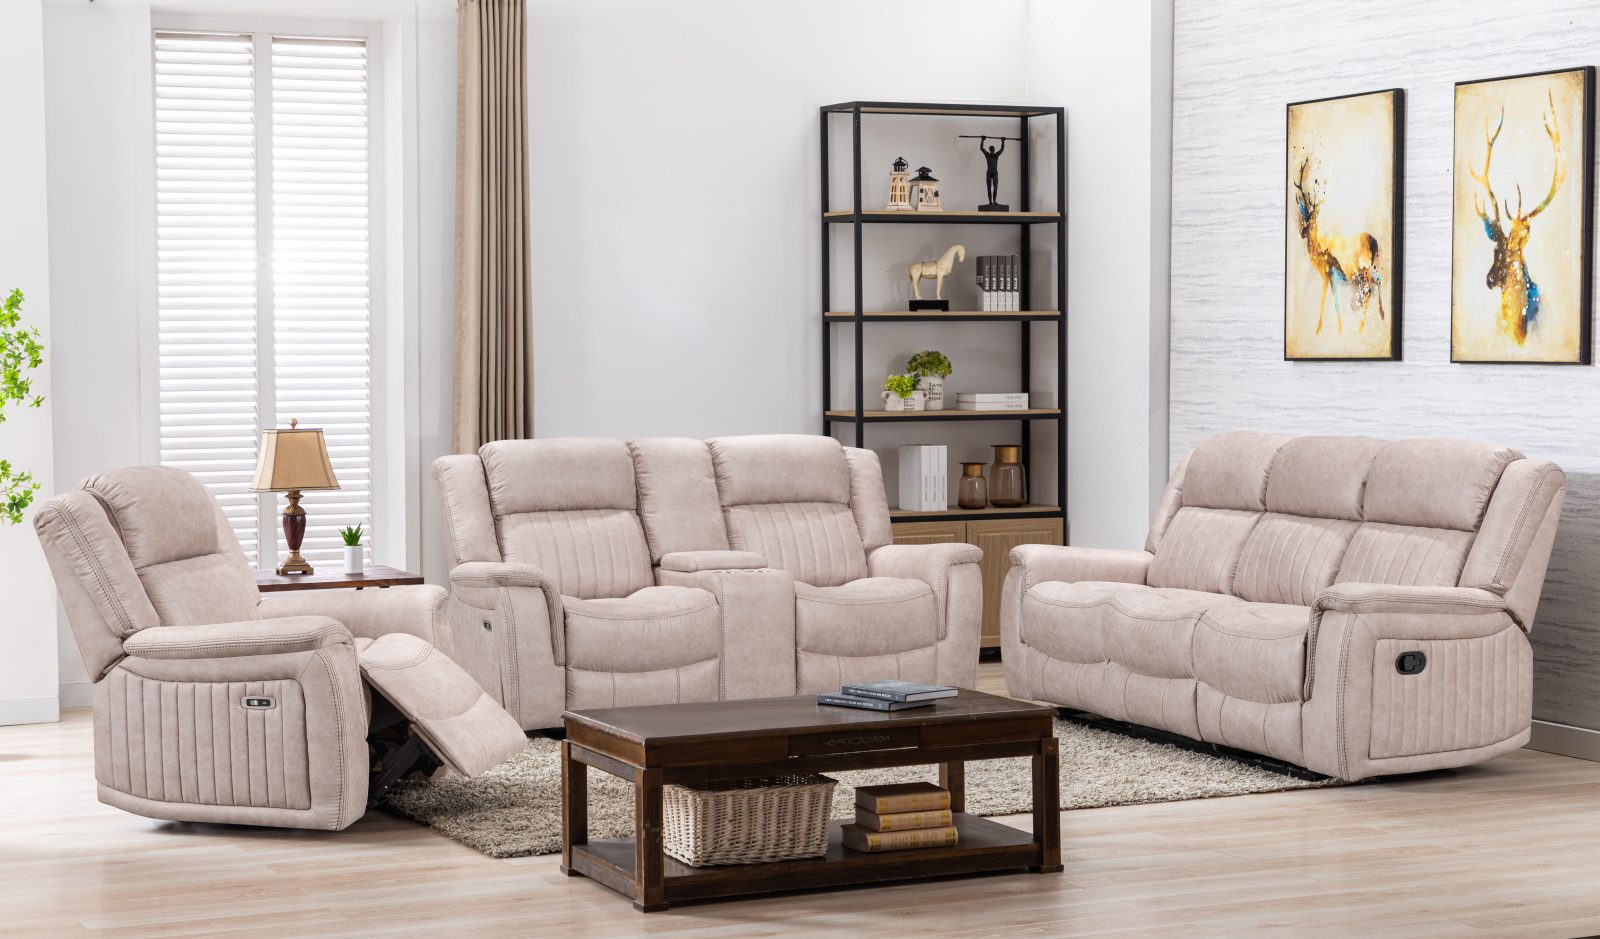 How To Move Recliner Sofa